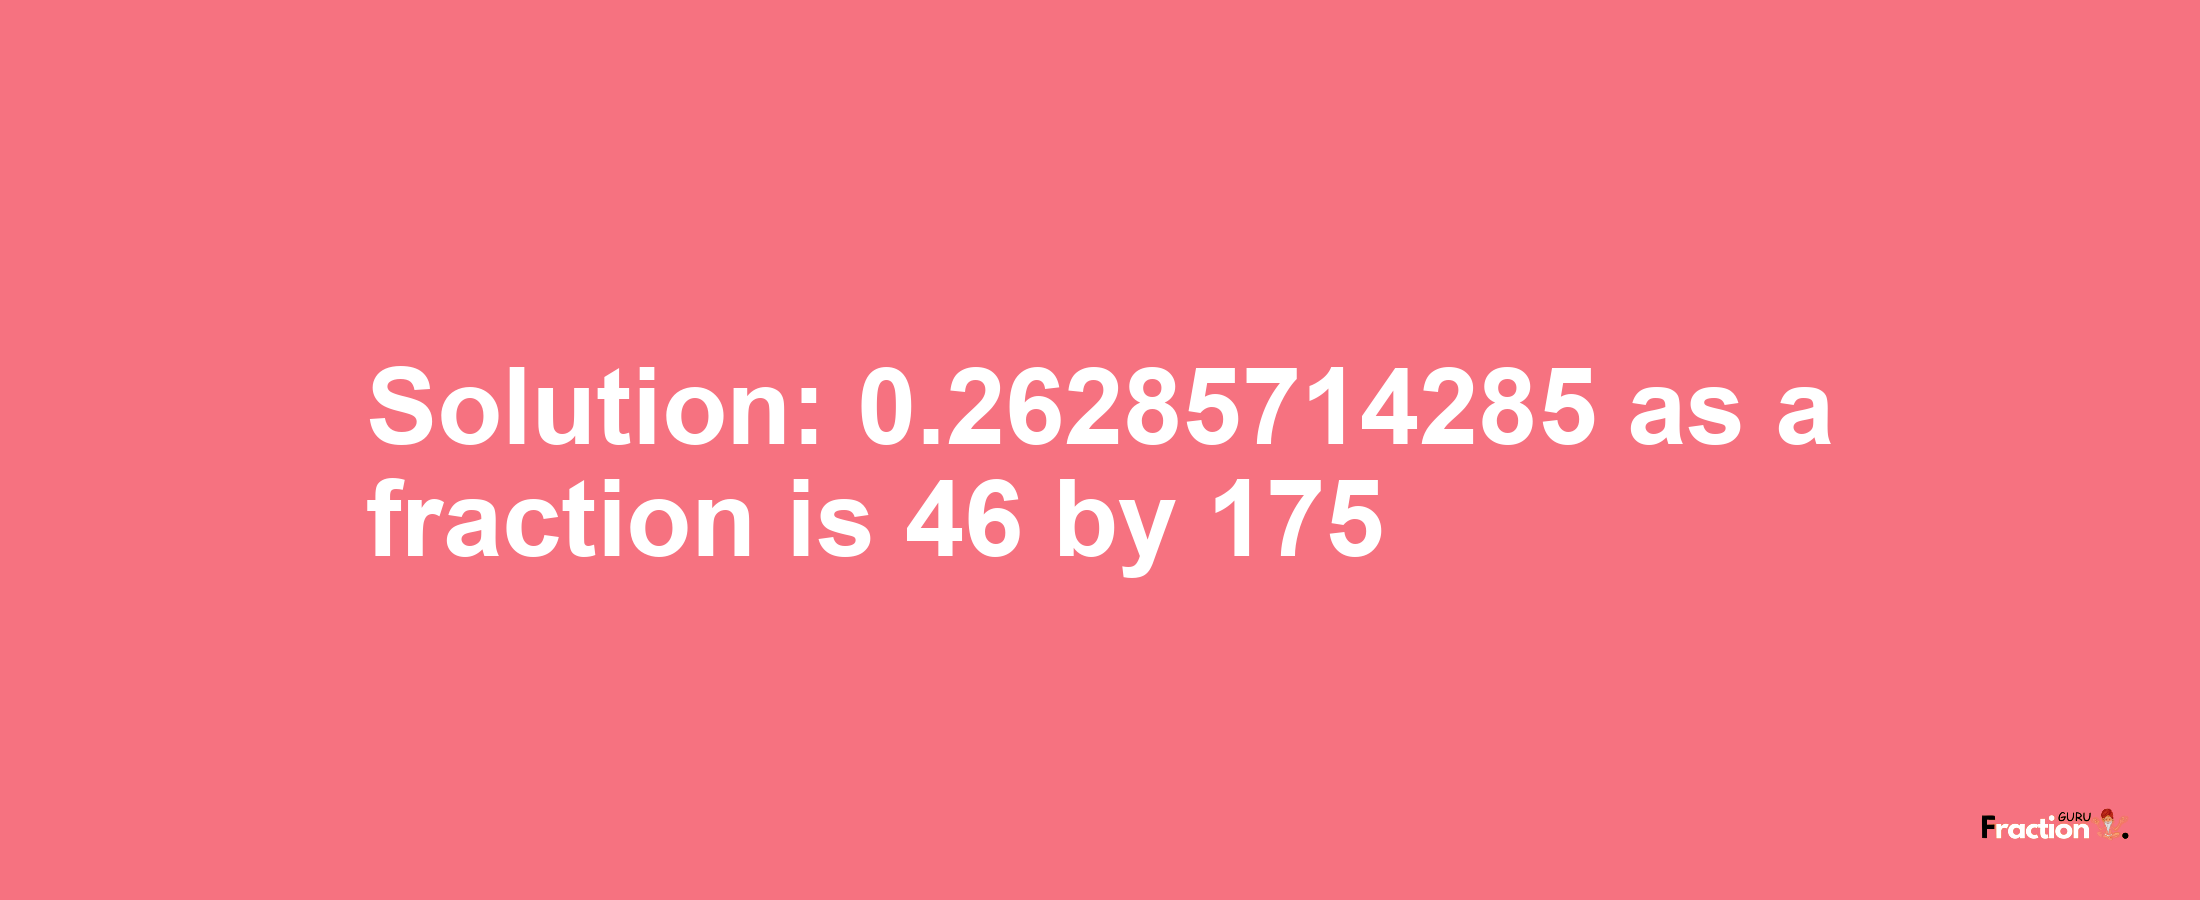 Solution:0.26285714285 as a fraction is 46/175